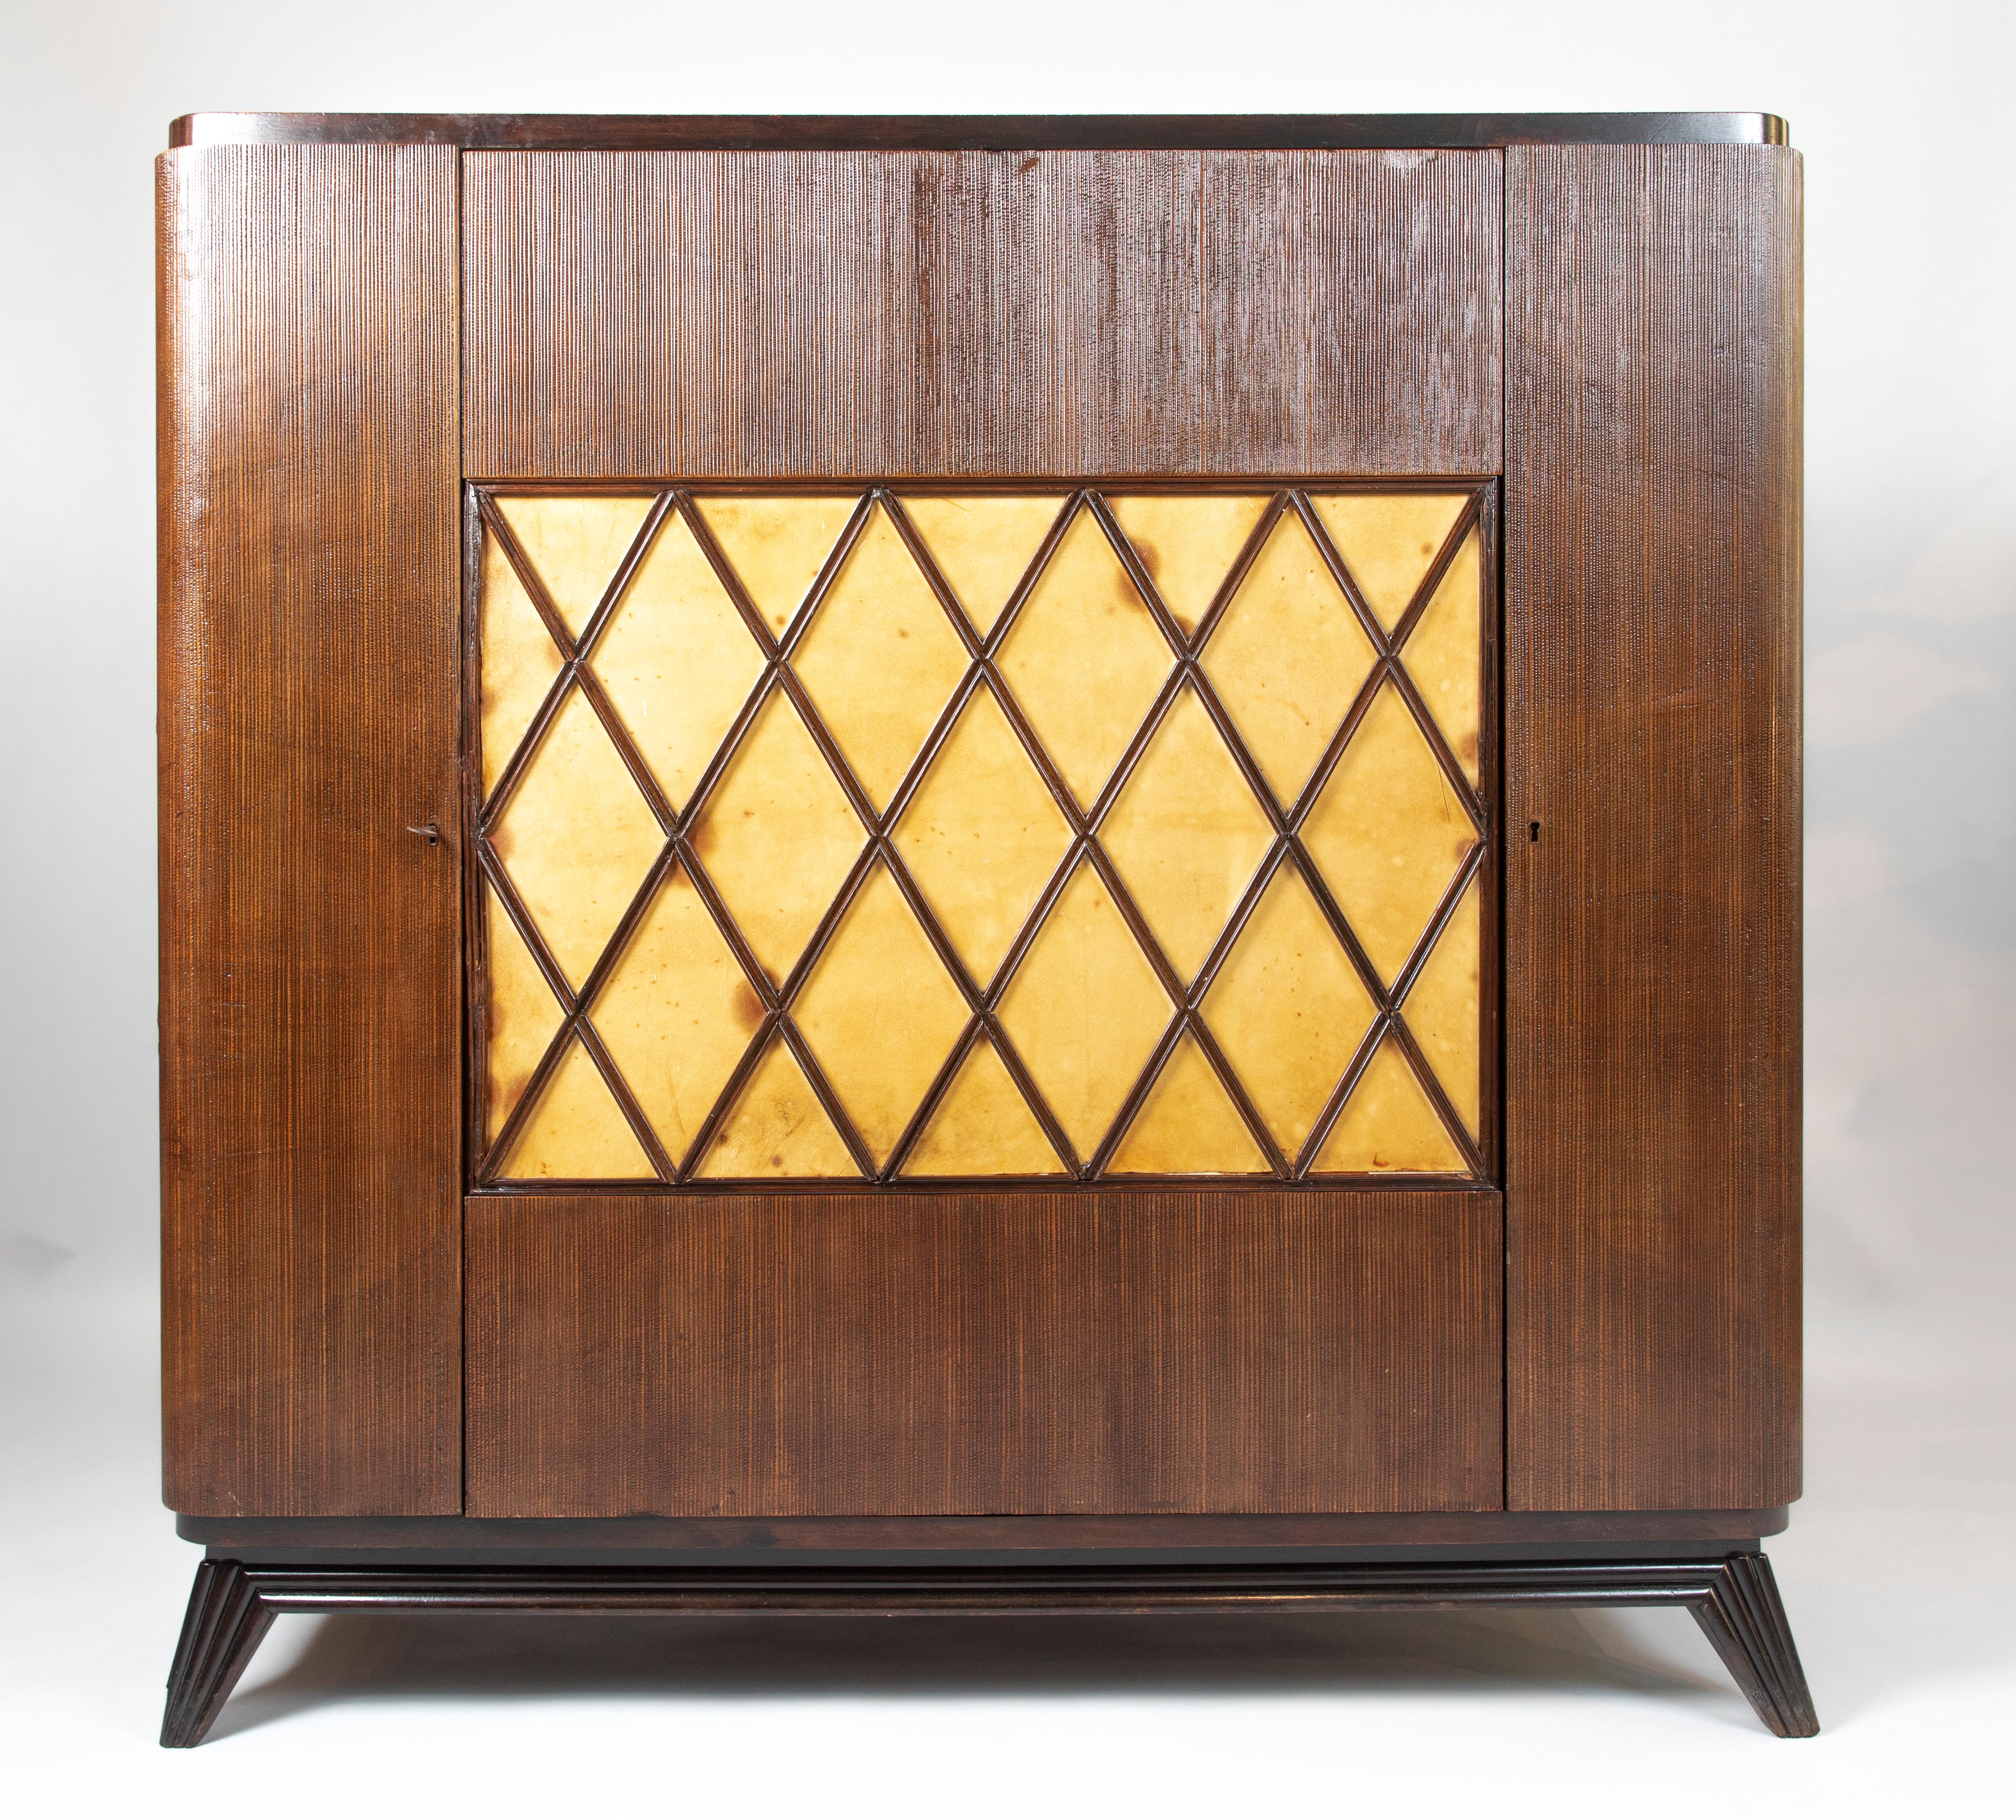 Osvaldo Borsani Rotating Cabinet bar , unique piece with the Expertise of Fondazione Borsani Archive
In walnut, mirror glass, brass and parchment